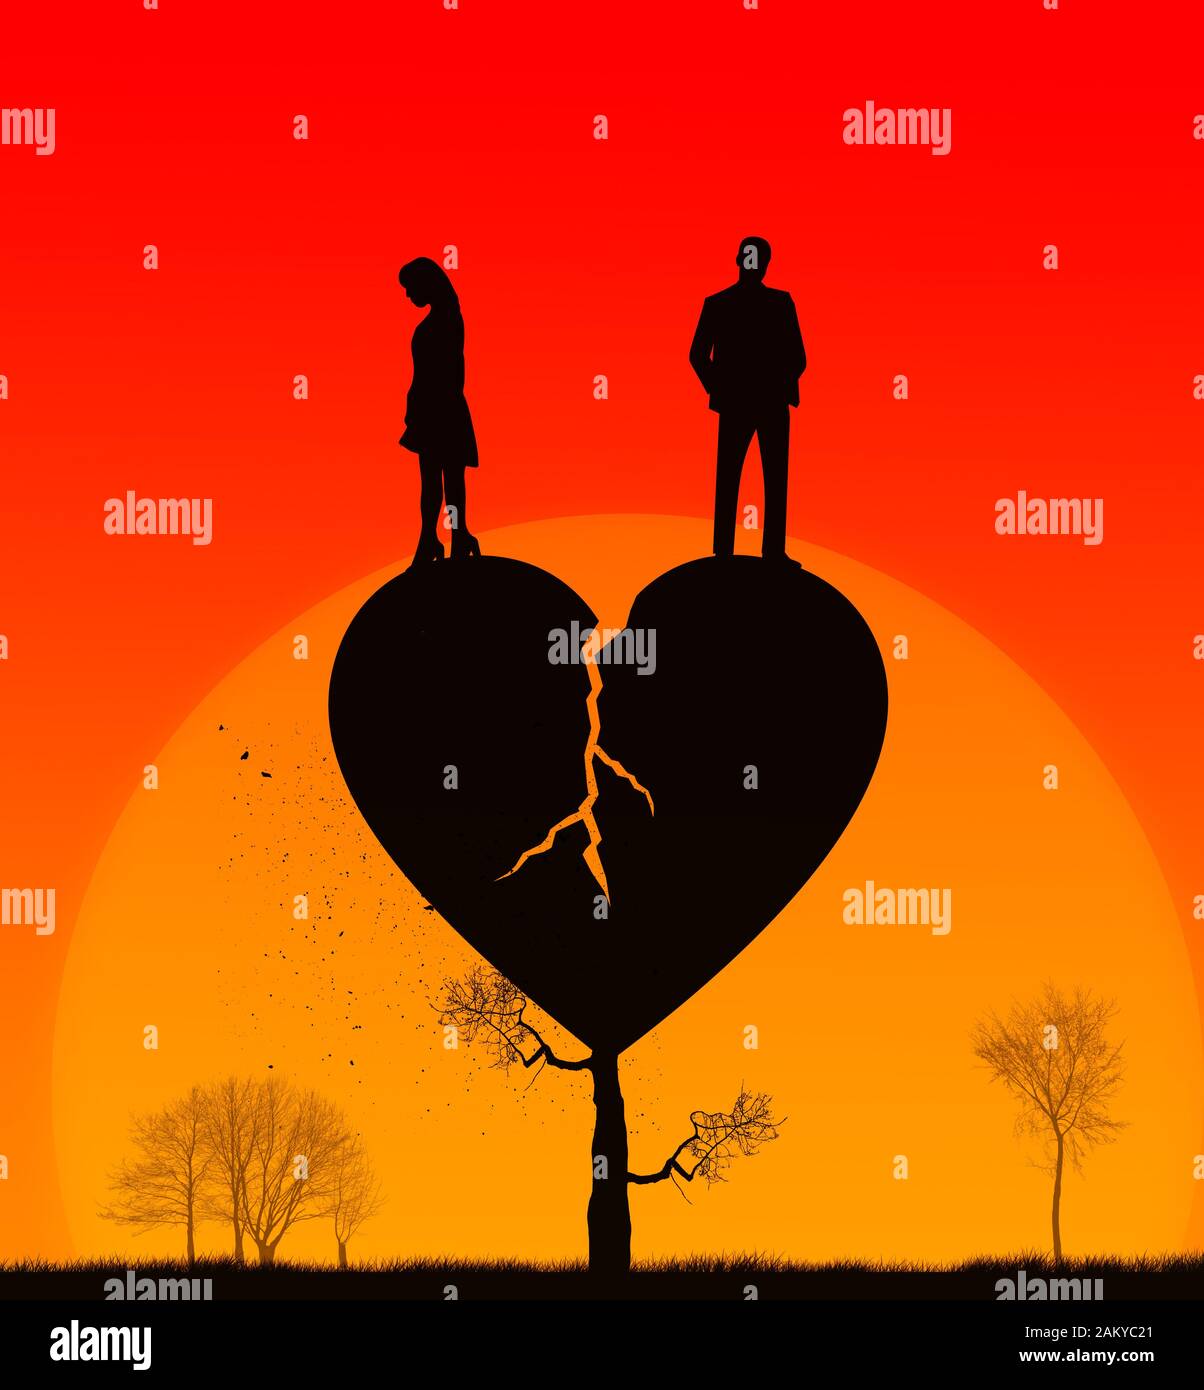 Failed love. Sunset relations. Silhouette of a man and woman in ended relationship on a broken heart shape tree. Broken family concept Stock Photo